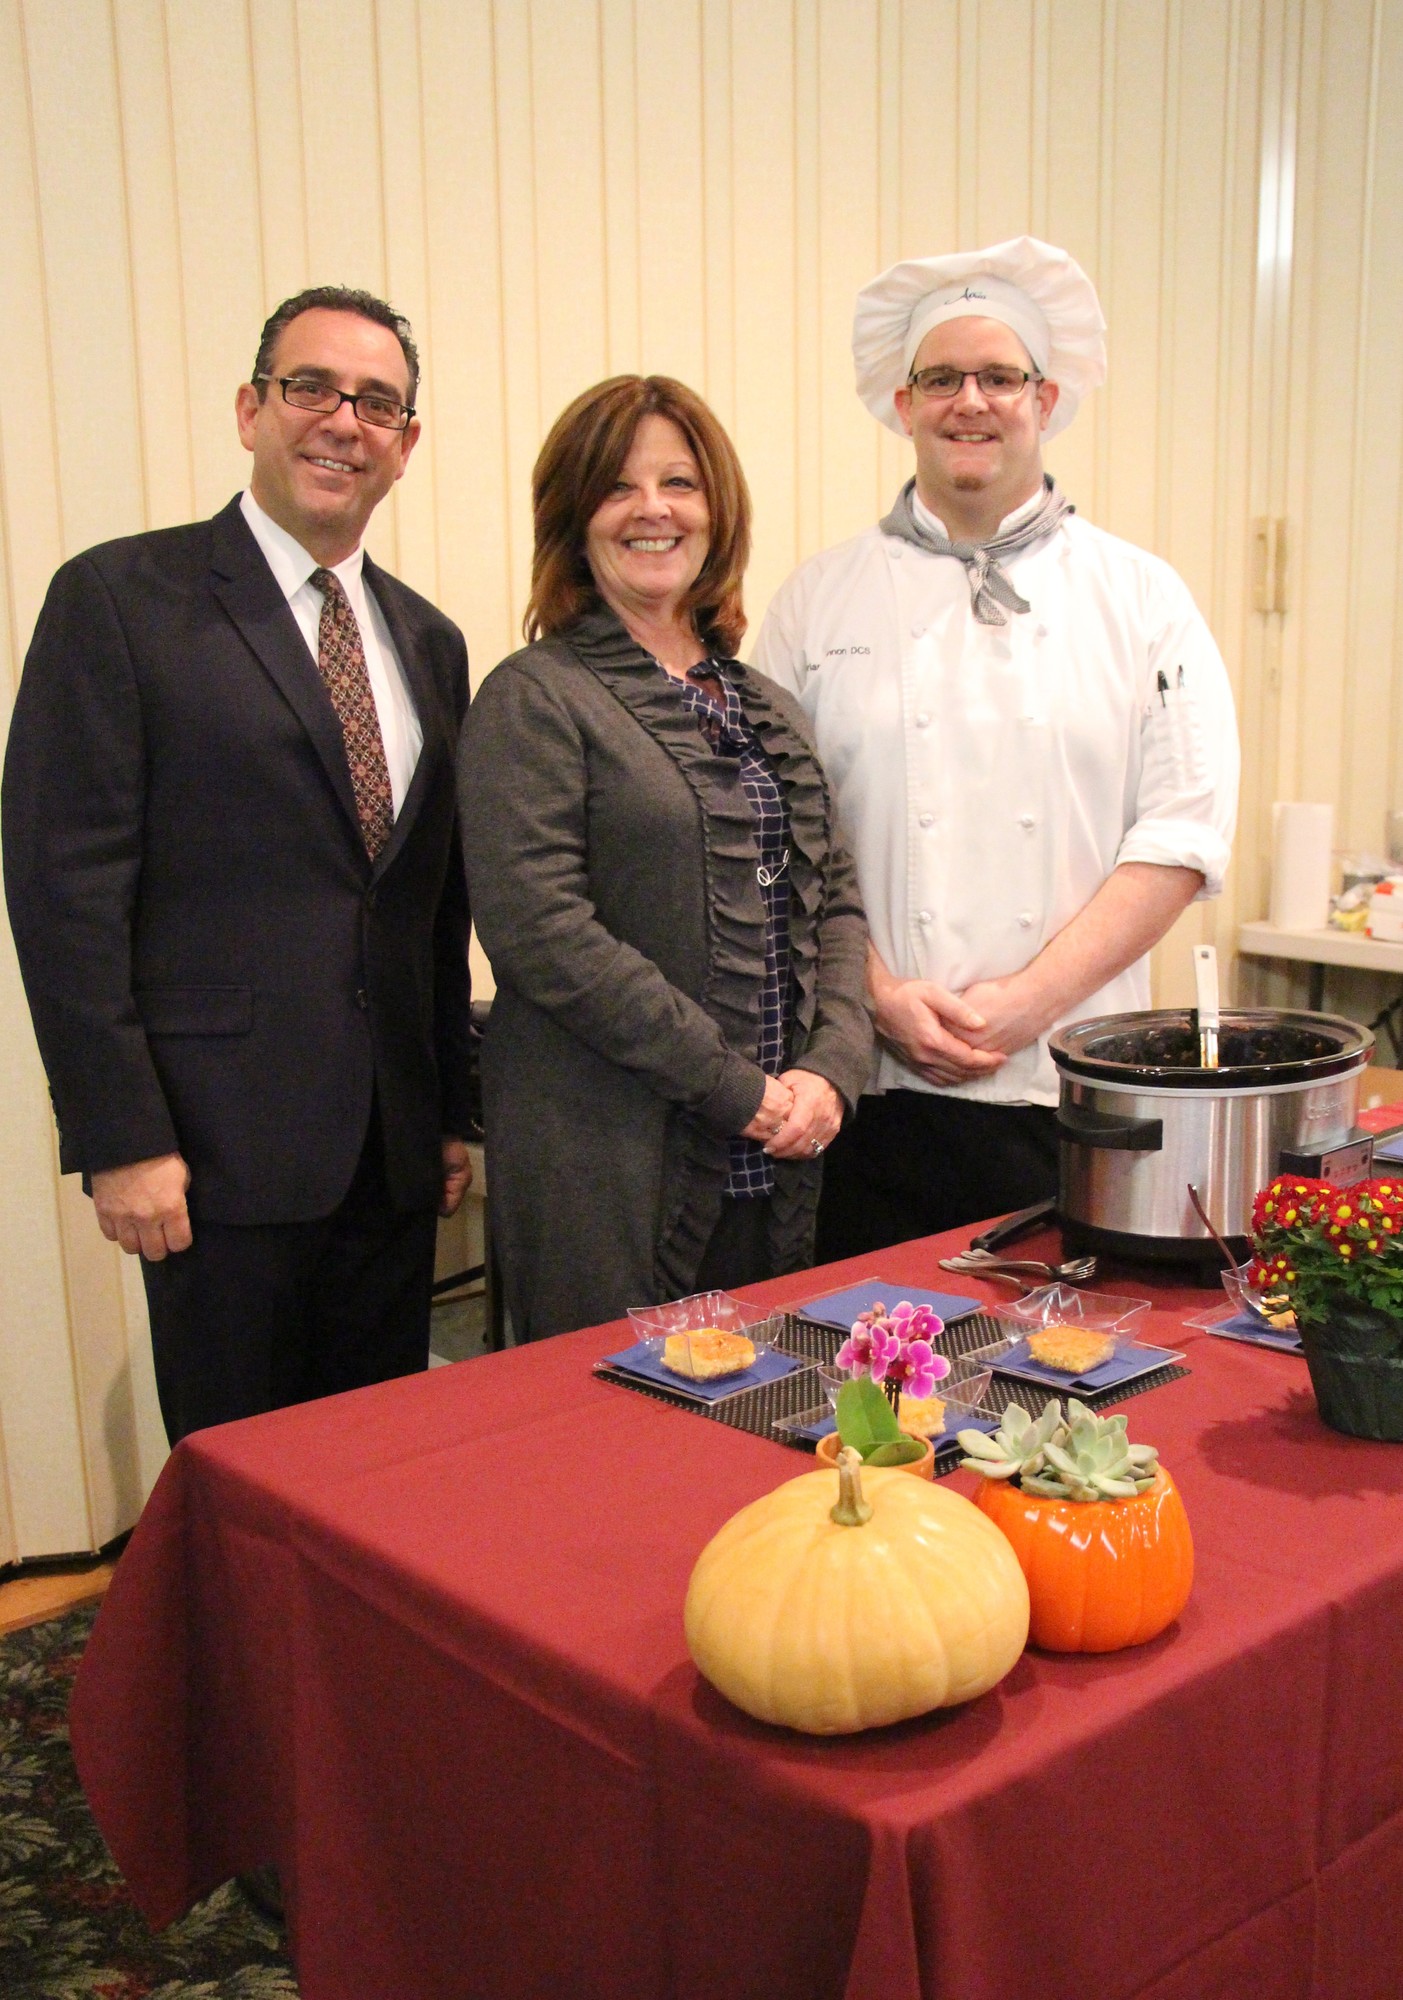 Photos by Maureen Lennon/Herald
Chef Brian Glennon, right, Atria’s Director of Culinary Services, served his delicious chili with slices of cornbread. He was joined by Executive Director of Atria Senior Living Rocco Bertini, left, and Community Sales Director Judy Piazza.